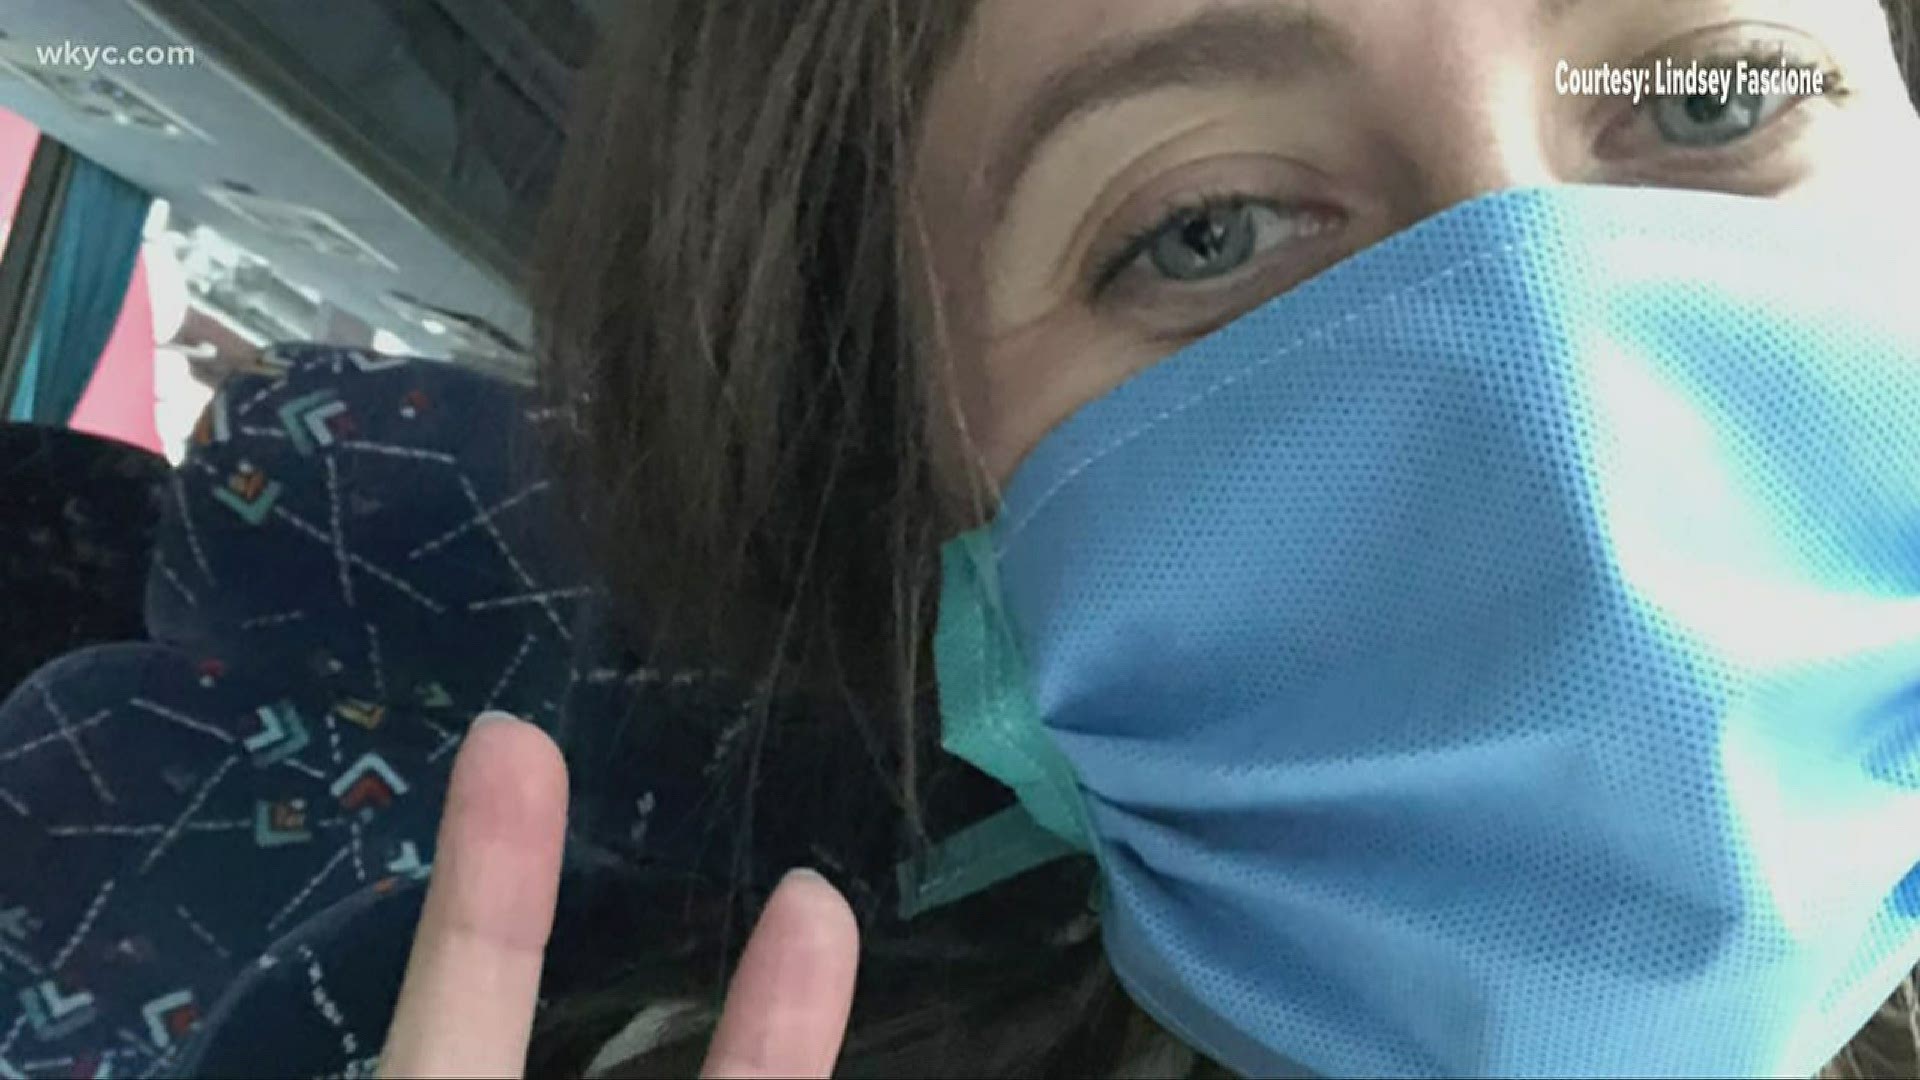 After volunteering to go help in New York City, a Cleveland Clinic nurse shares the story of why she volunteered and how it's going. Will Ujek reports.